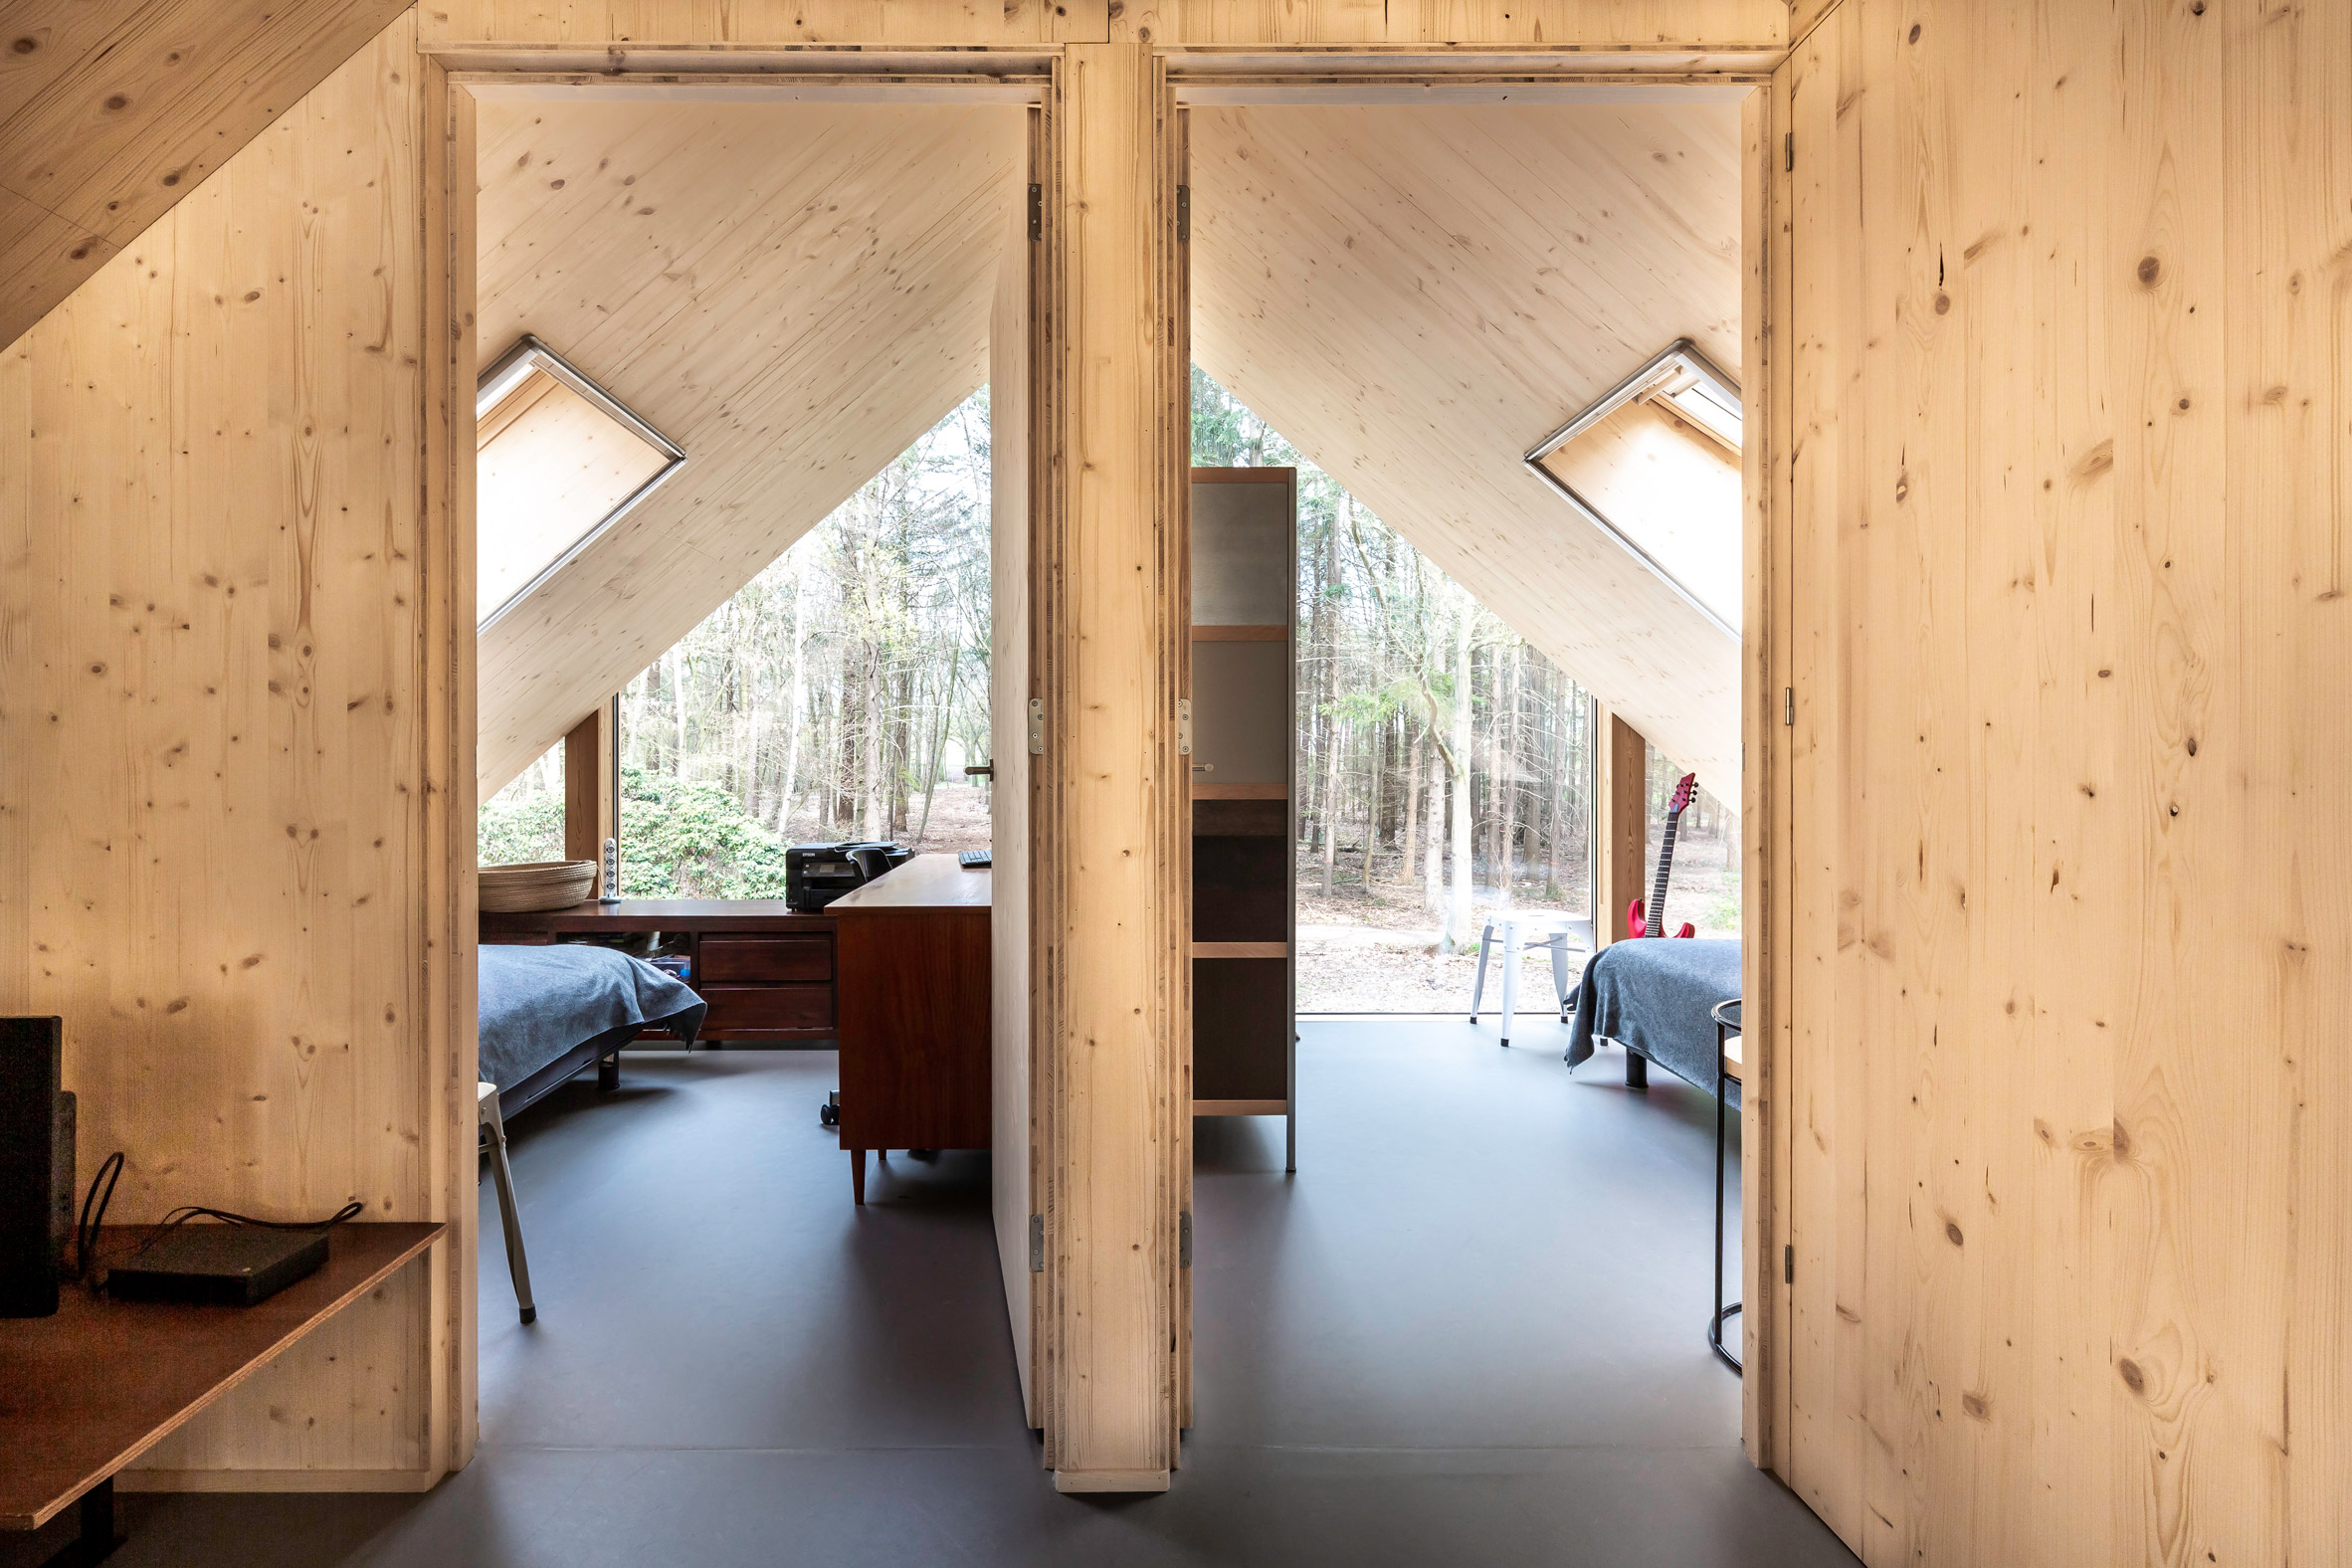 Wood-lined bedrooms in a forest cabin